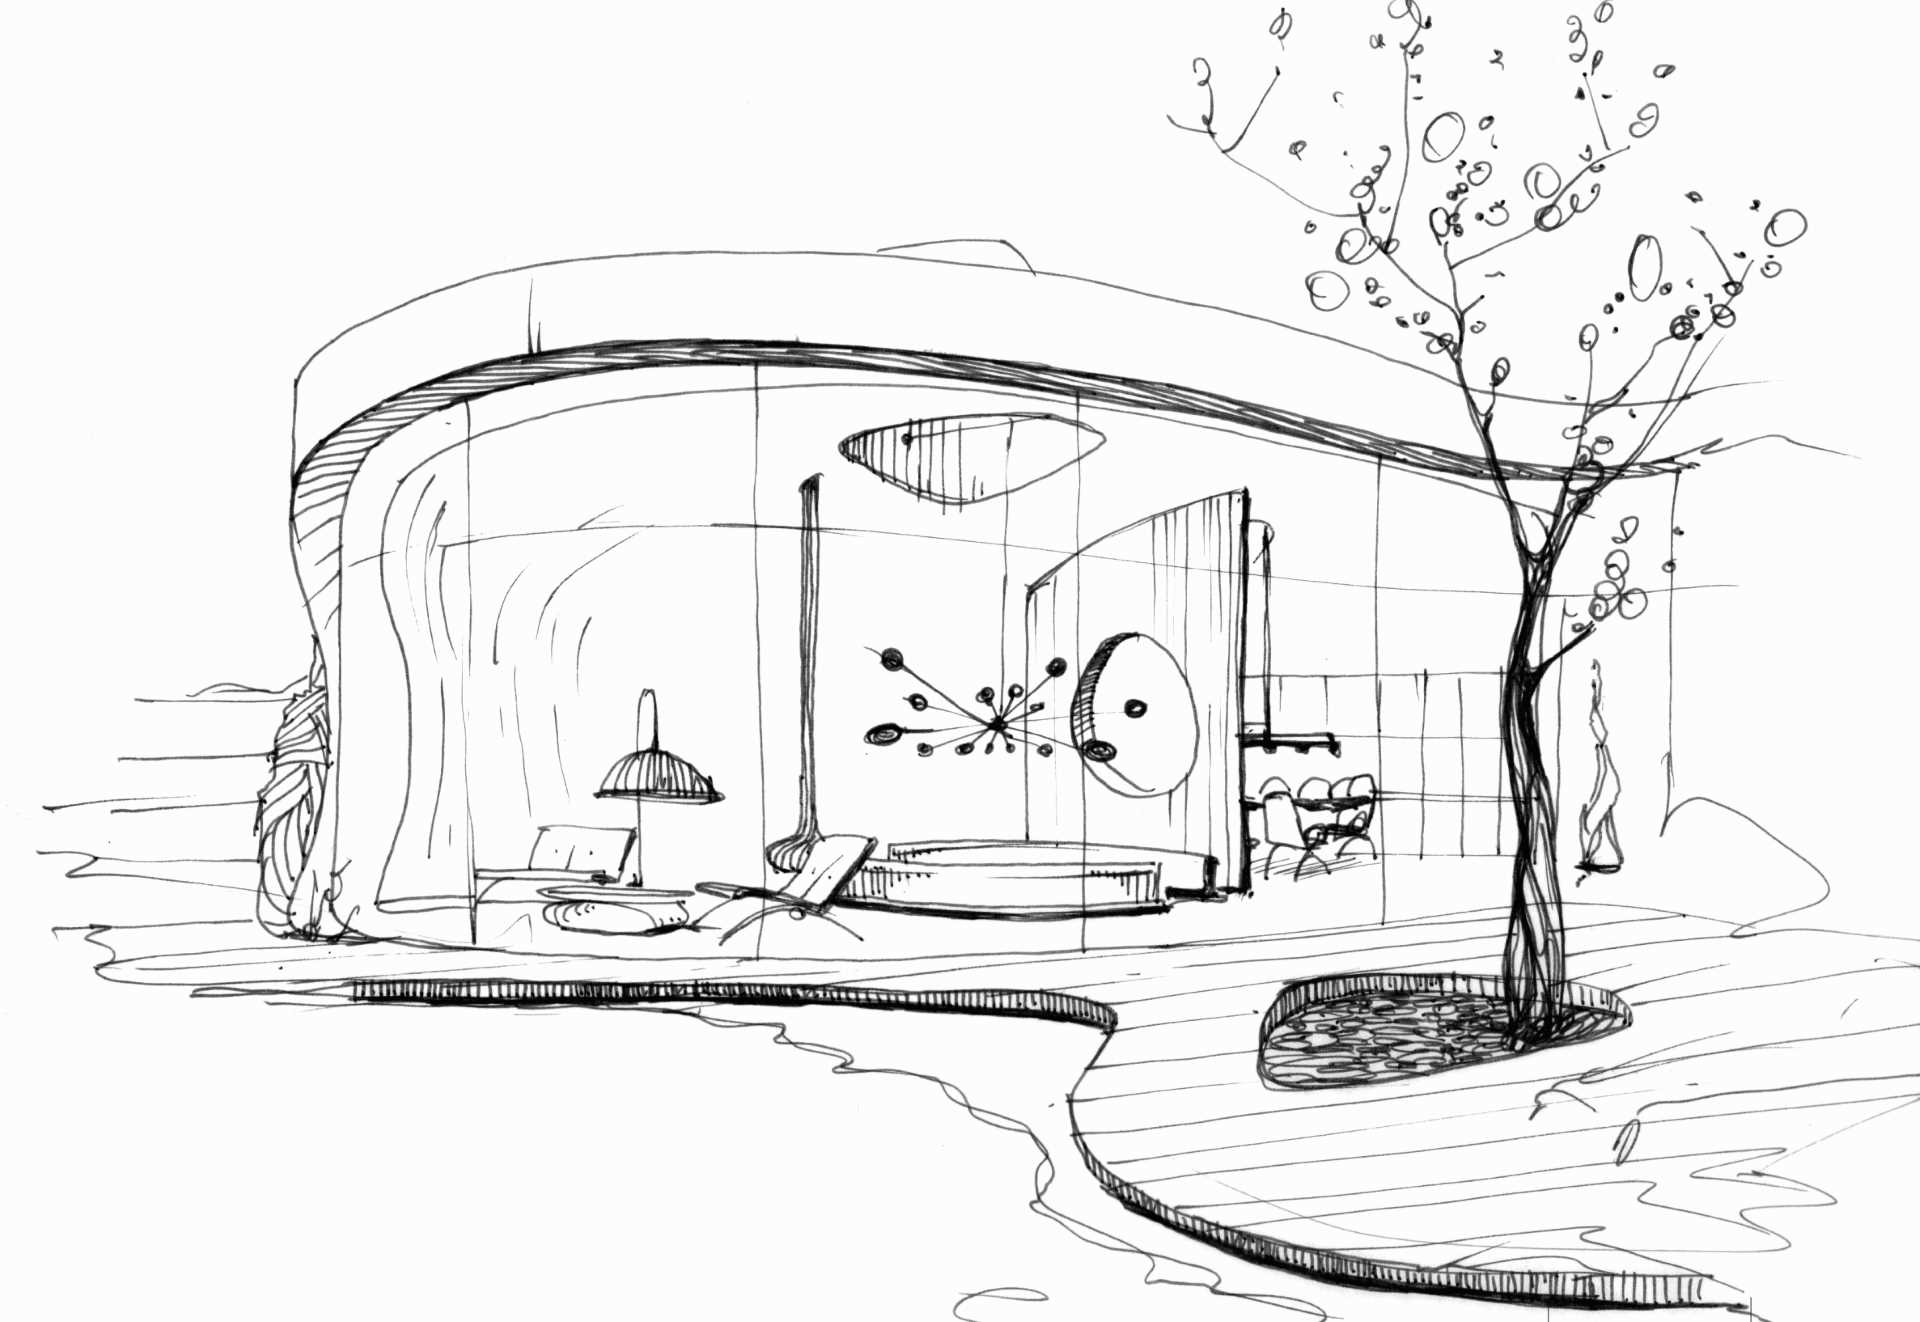 Architectural drawings of a modern sculptural home.